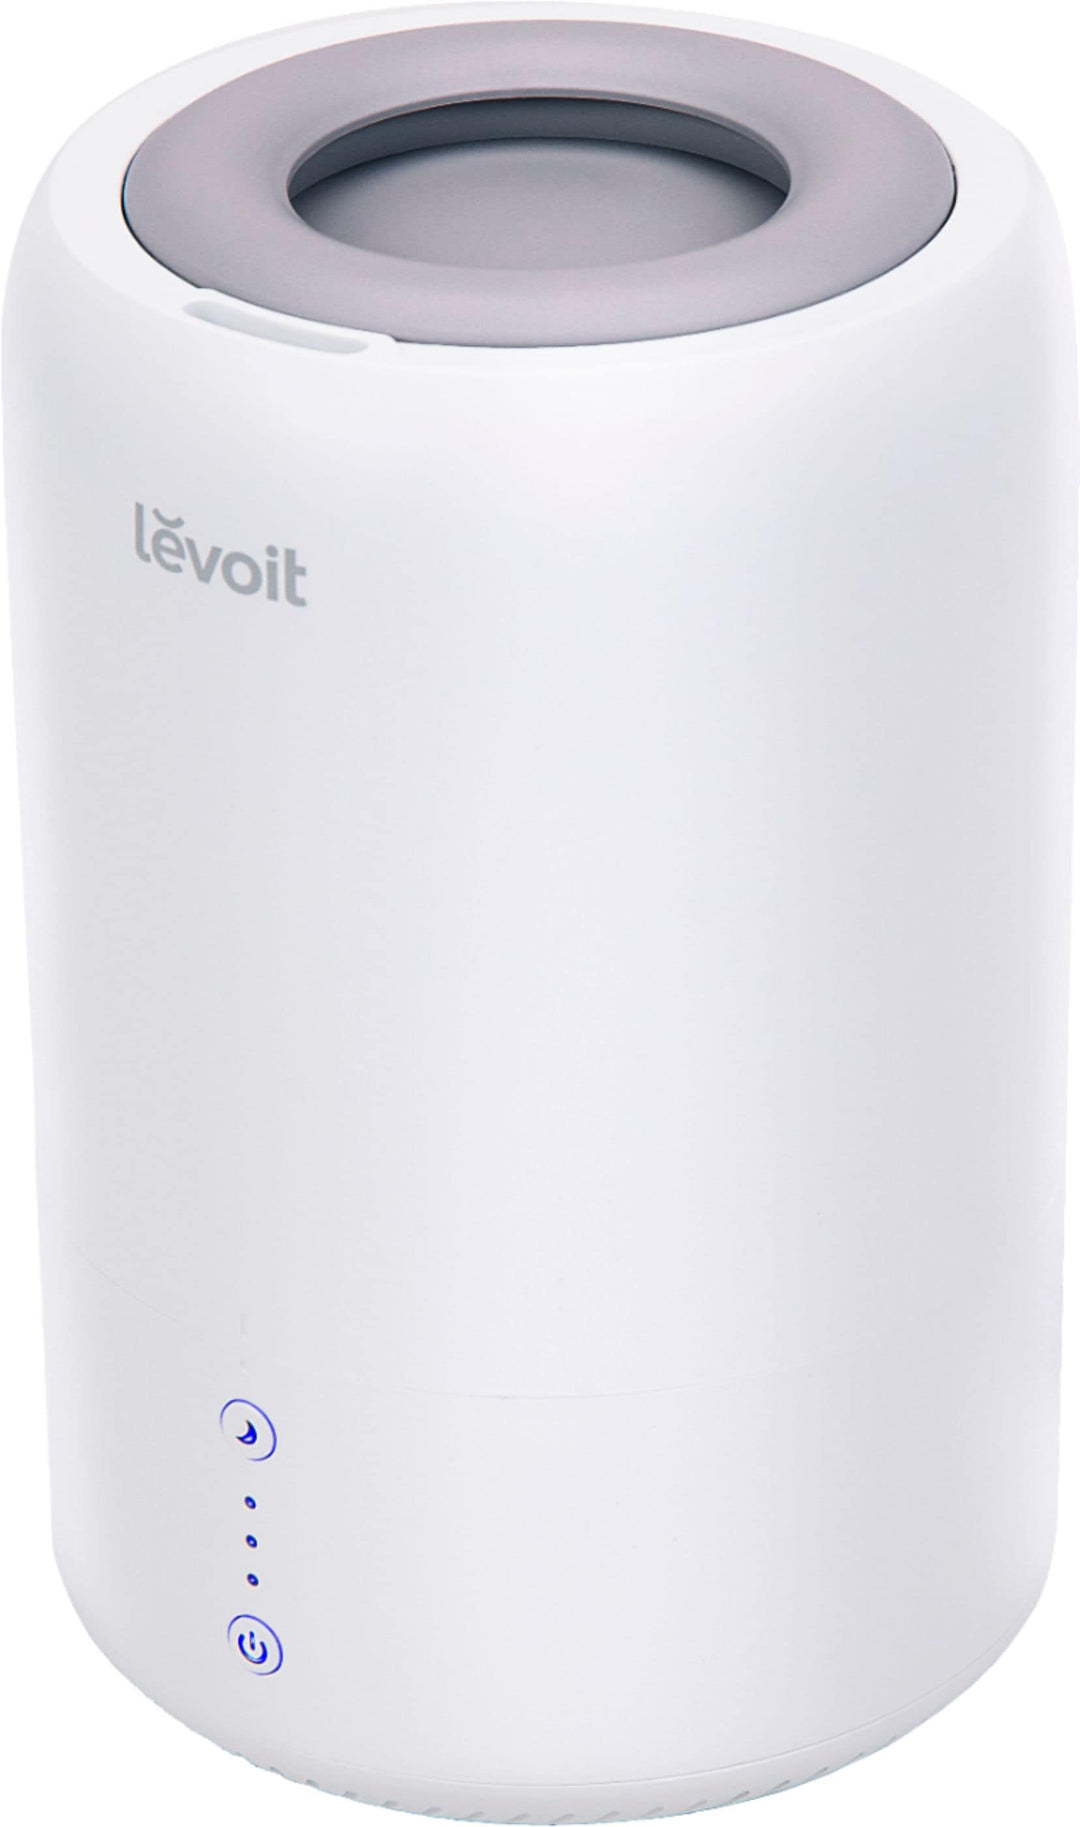 Levoit - Ultrasonic Top-Fill Cool Mist 2-in-1 0.5 Gal Humidifier & Diffuser - White_1